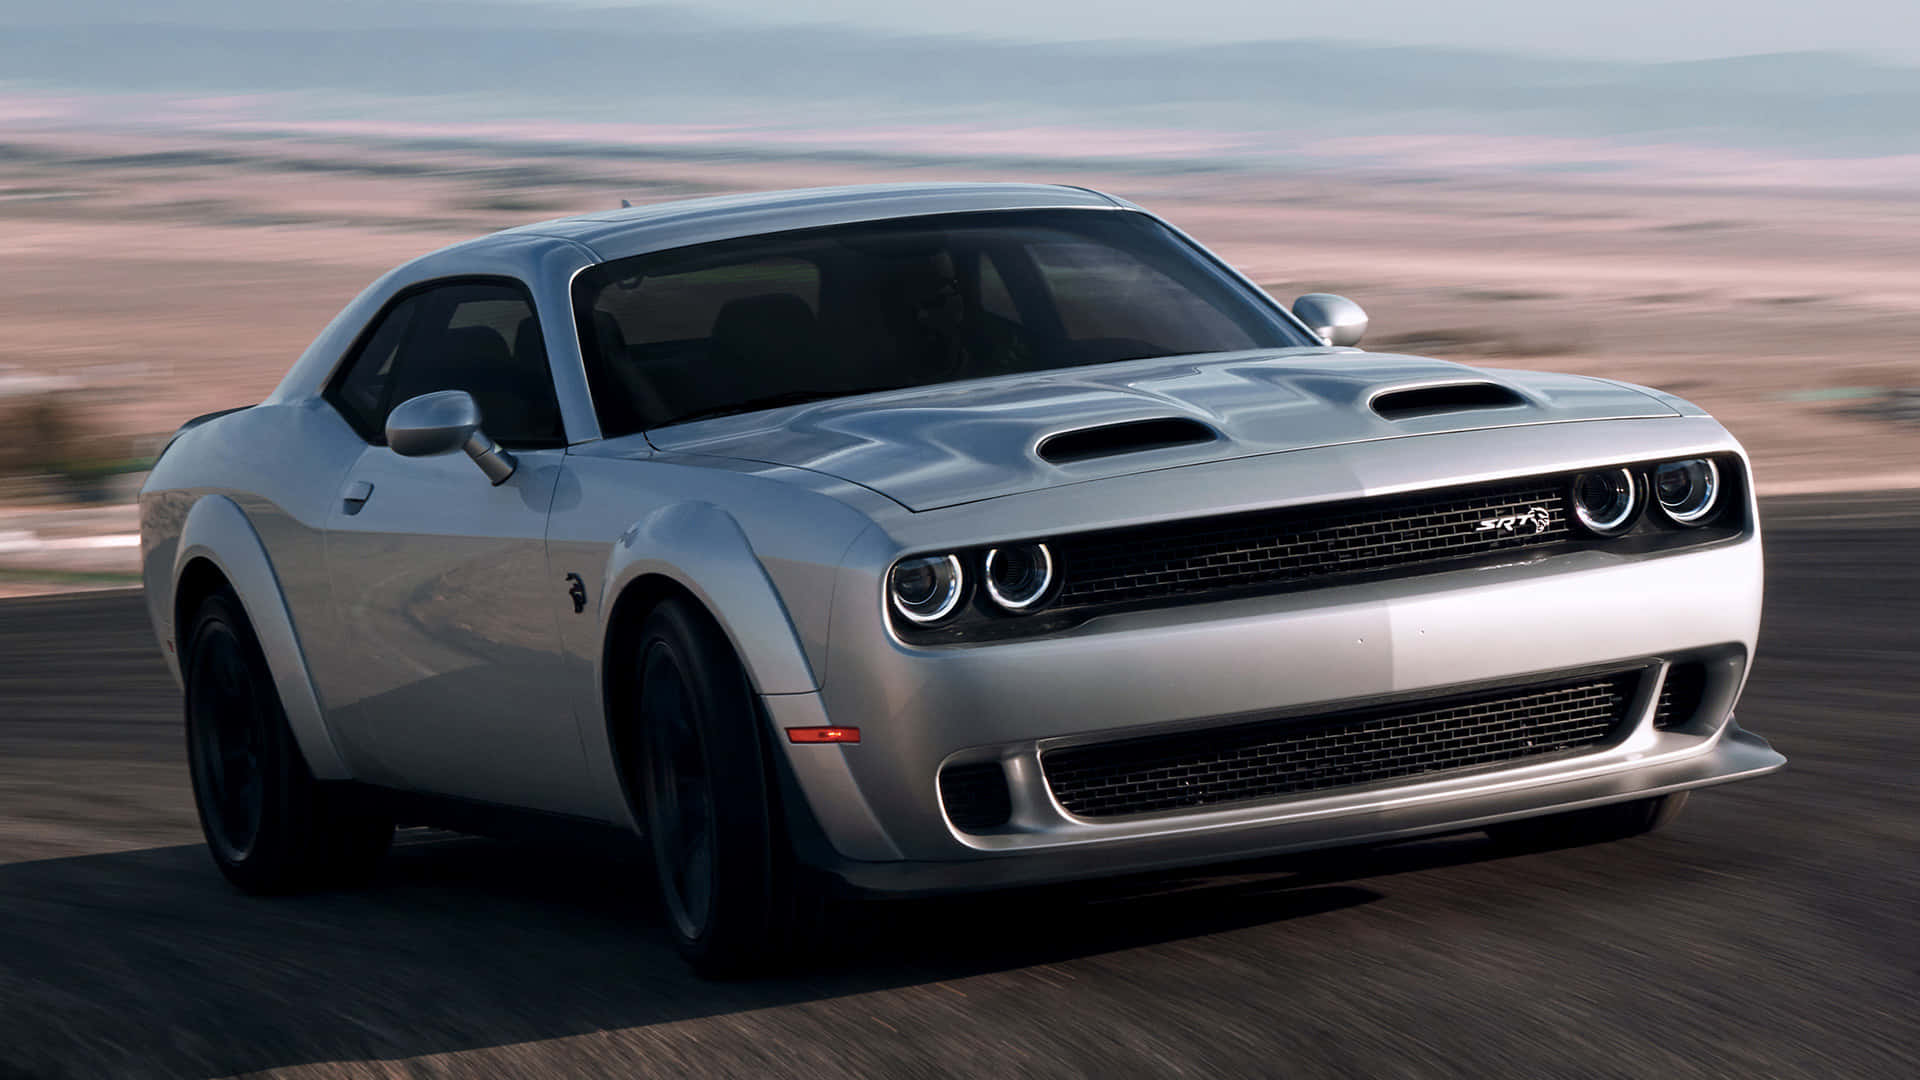 Aggressive Stylings Of The Dodge Hellcat Background